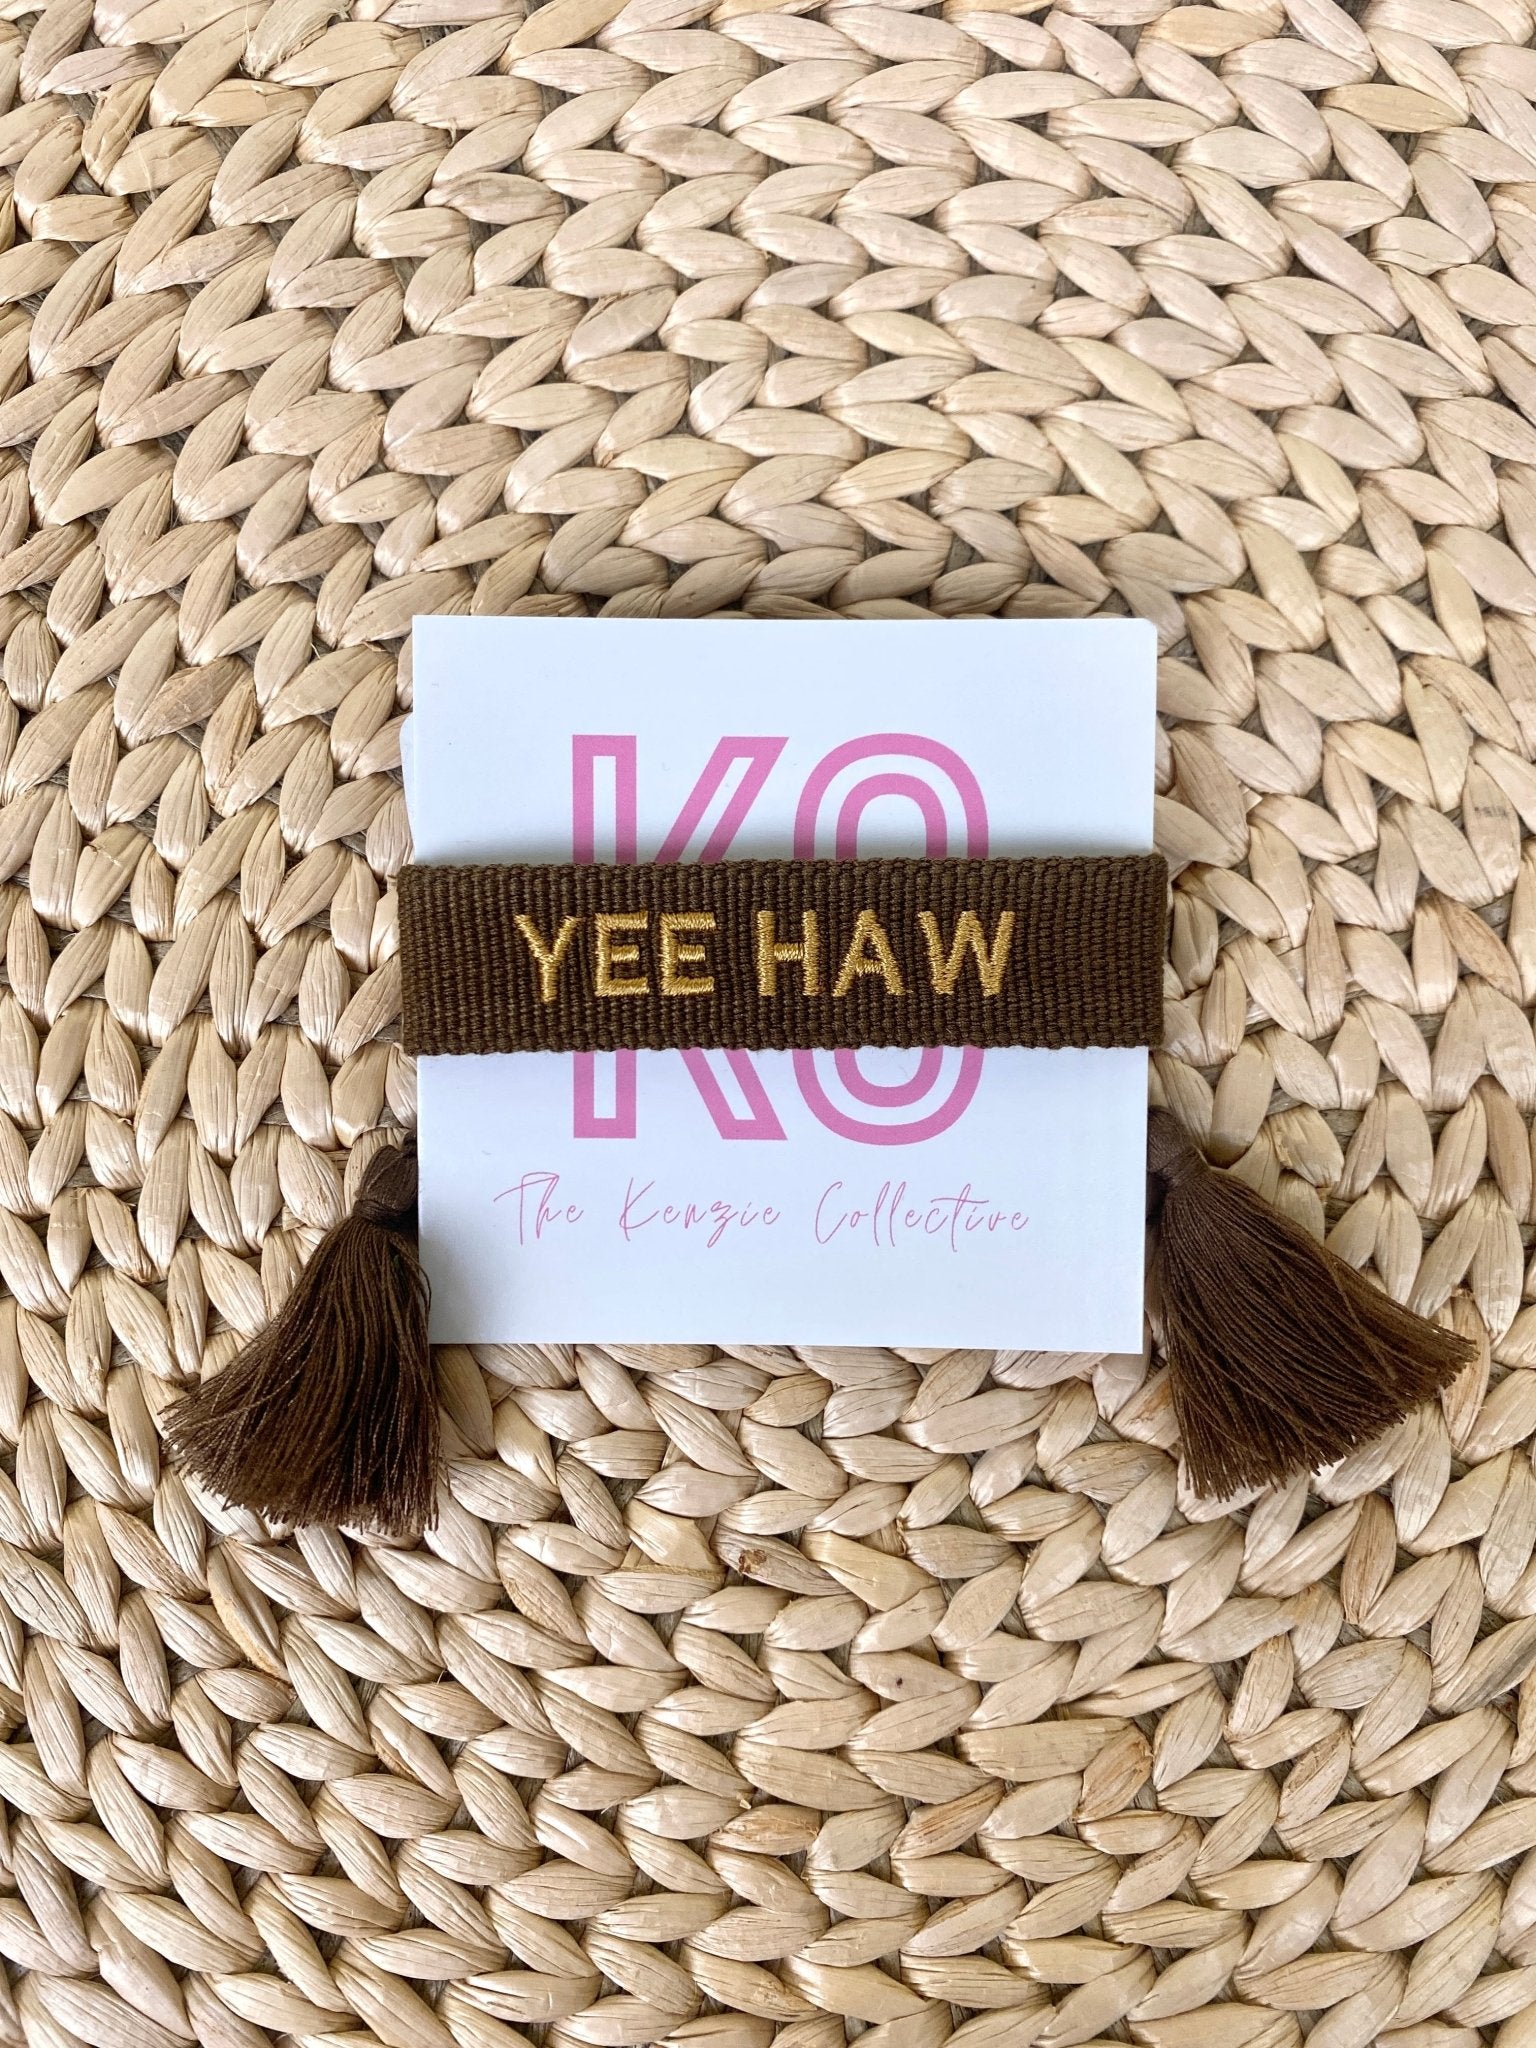 Yeehaw tassel bracelet brown - Stylish Bracelets - Affordable Jewelry and Belts at Lush Fashion Lounge Boutique in Oklahoma City